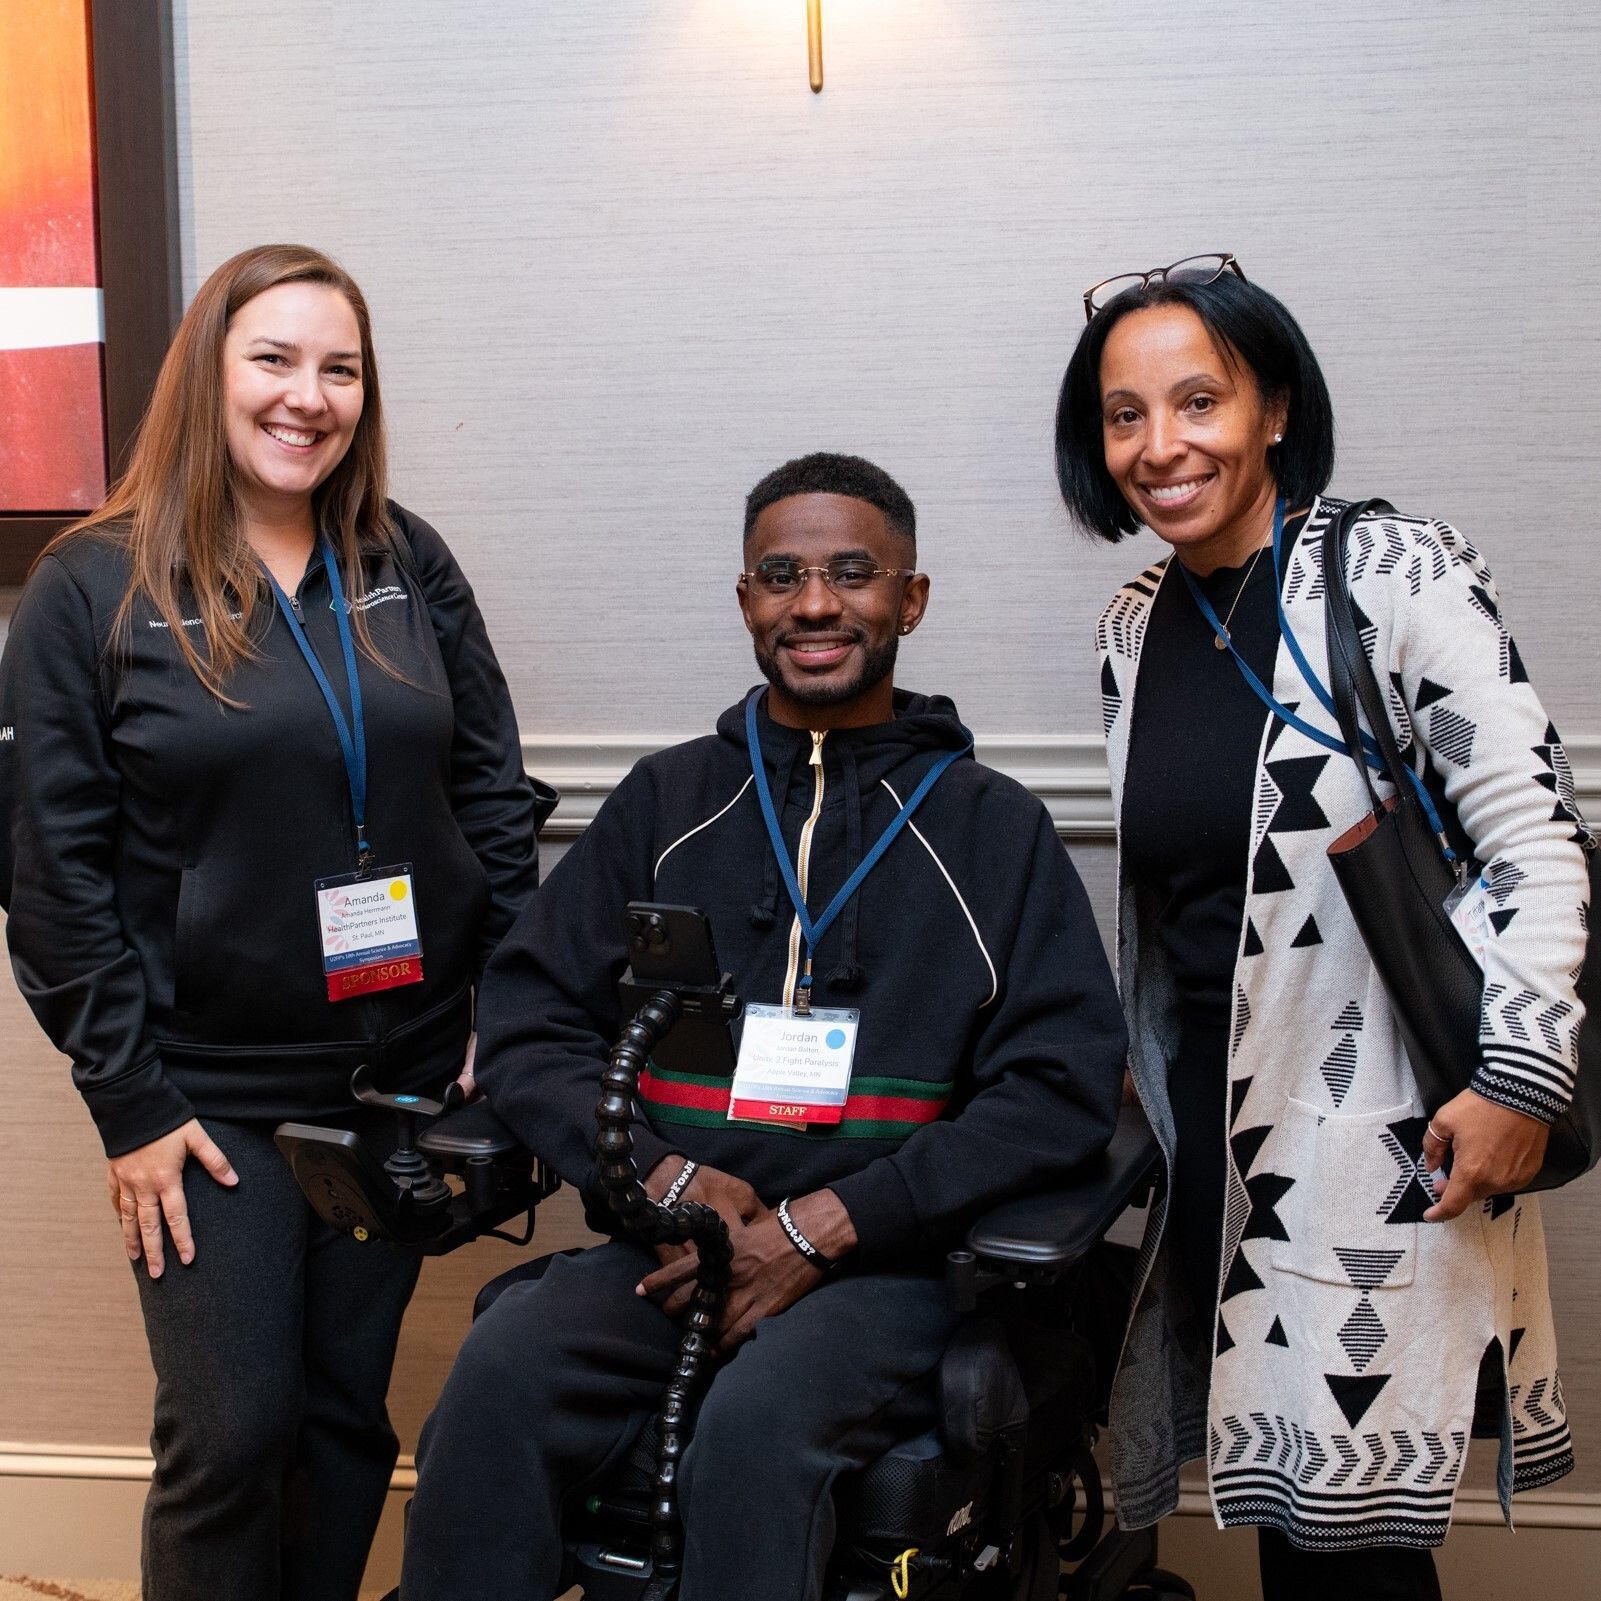 White woman stands to left of a black man in a wheelchair with a black woman standing on the right side of the wheelchair